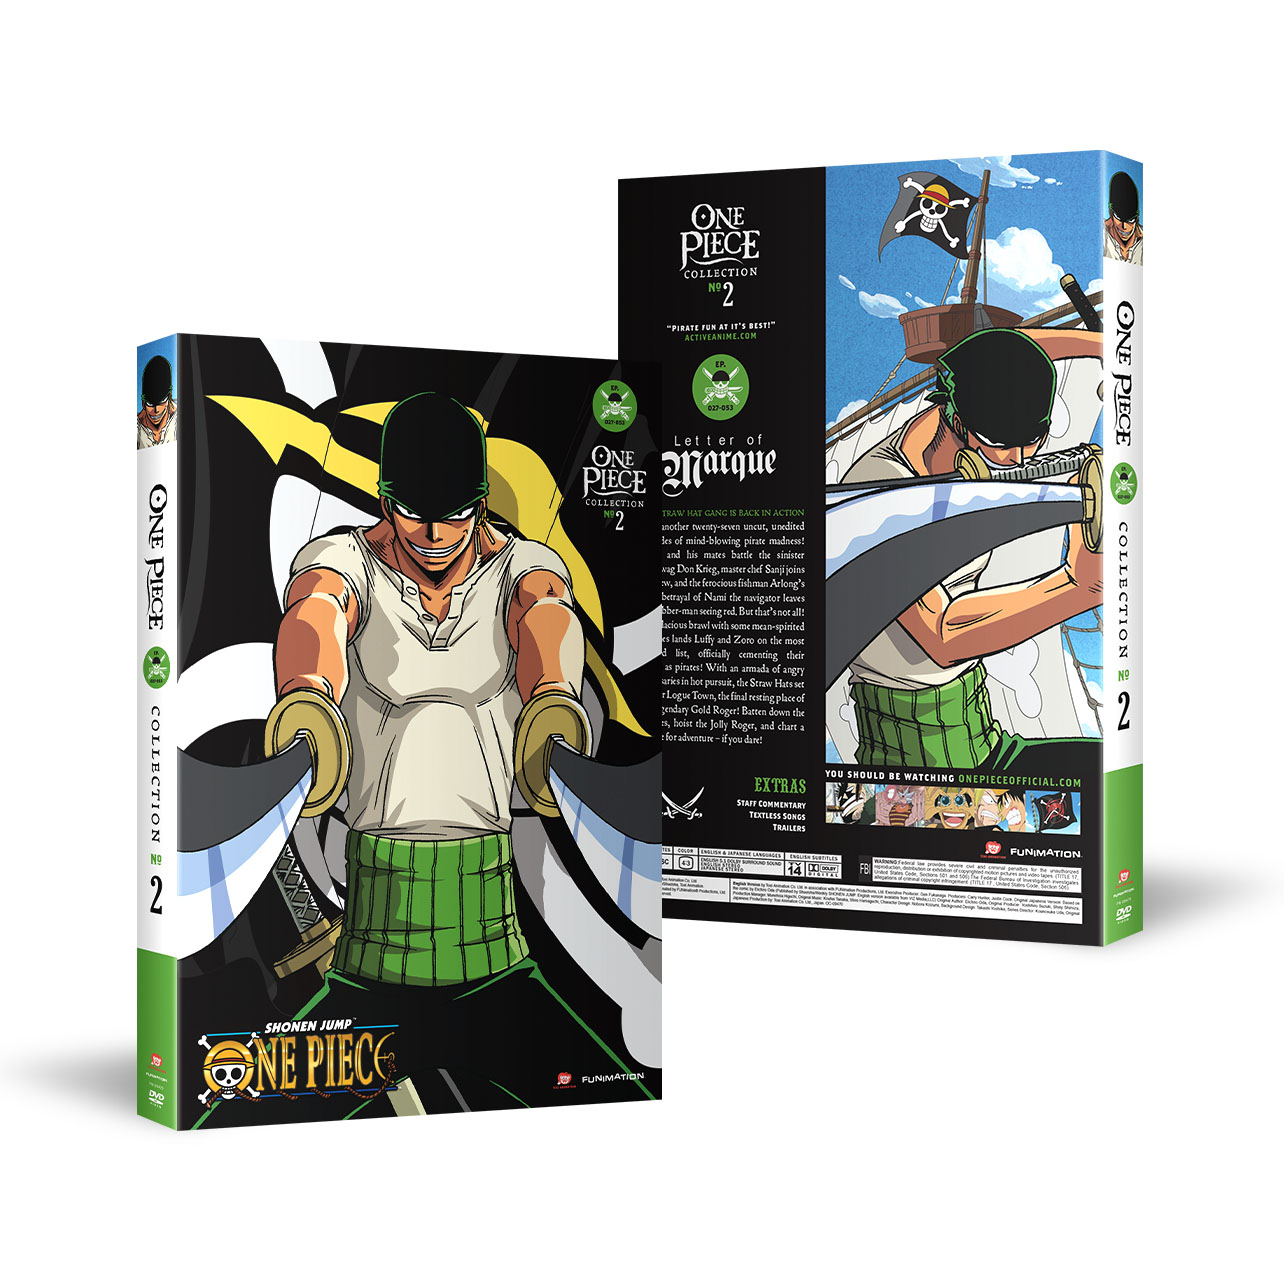 One Piece - Collection 2 - DVD image count 0